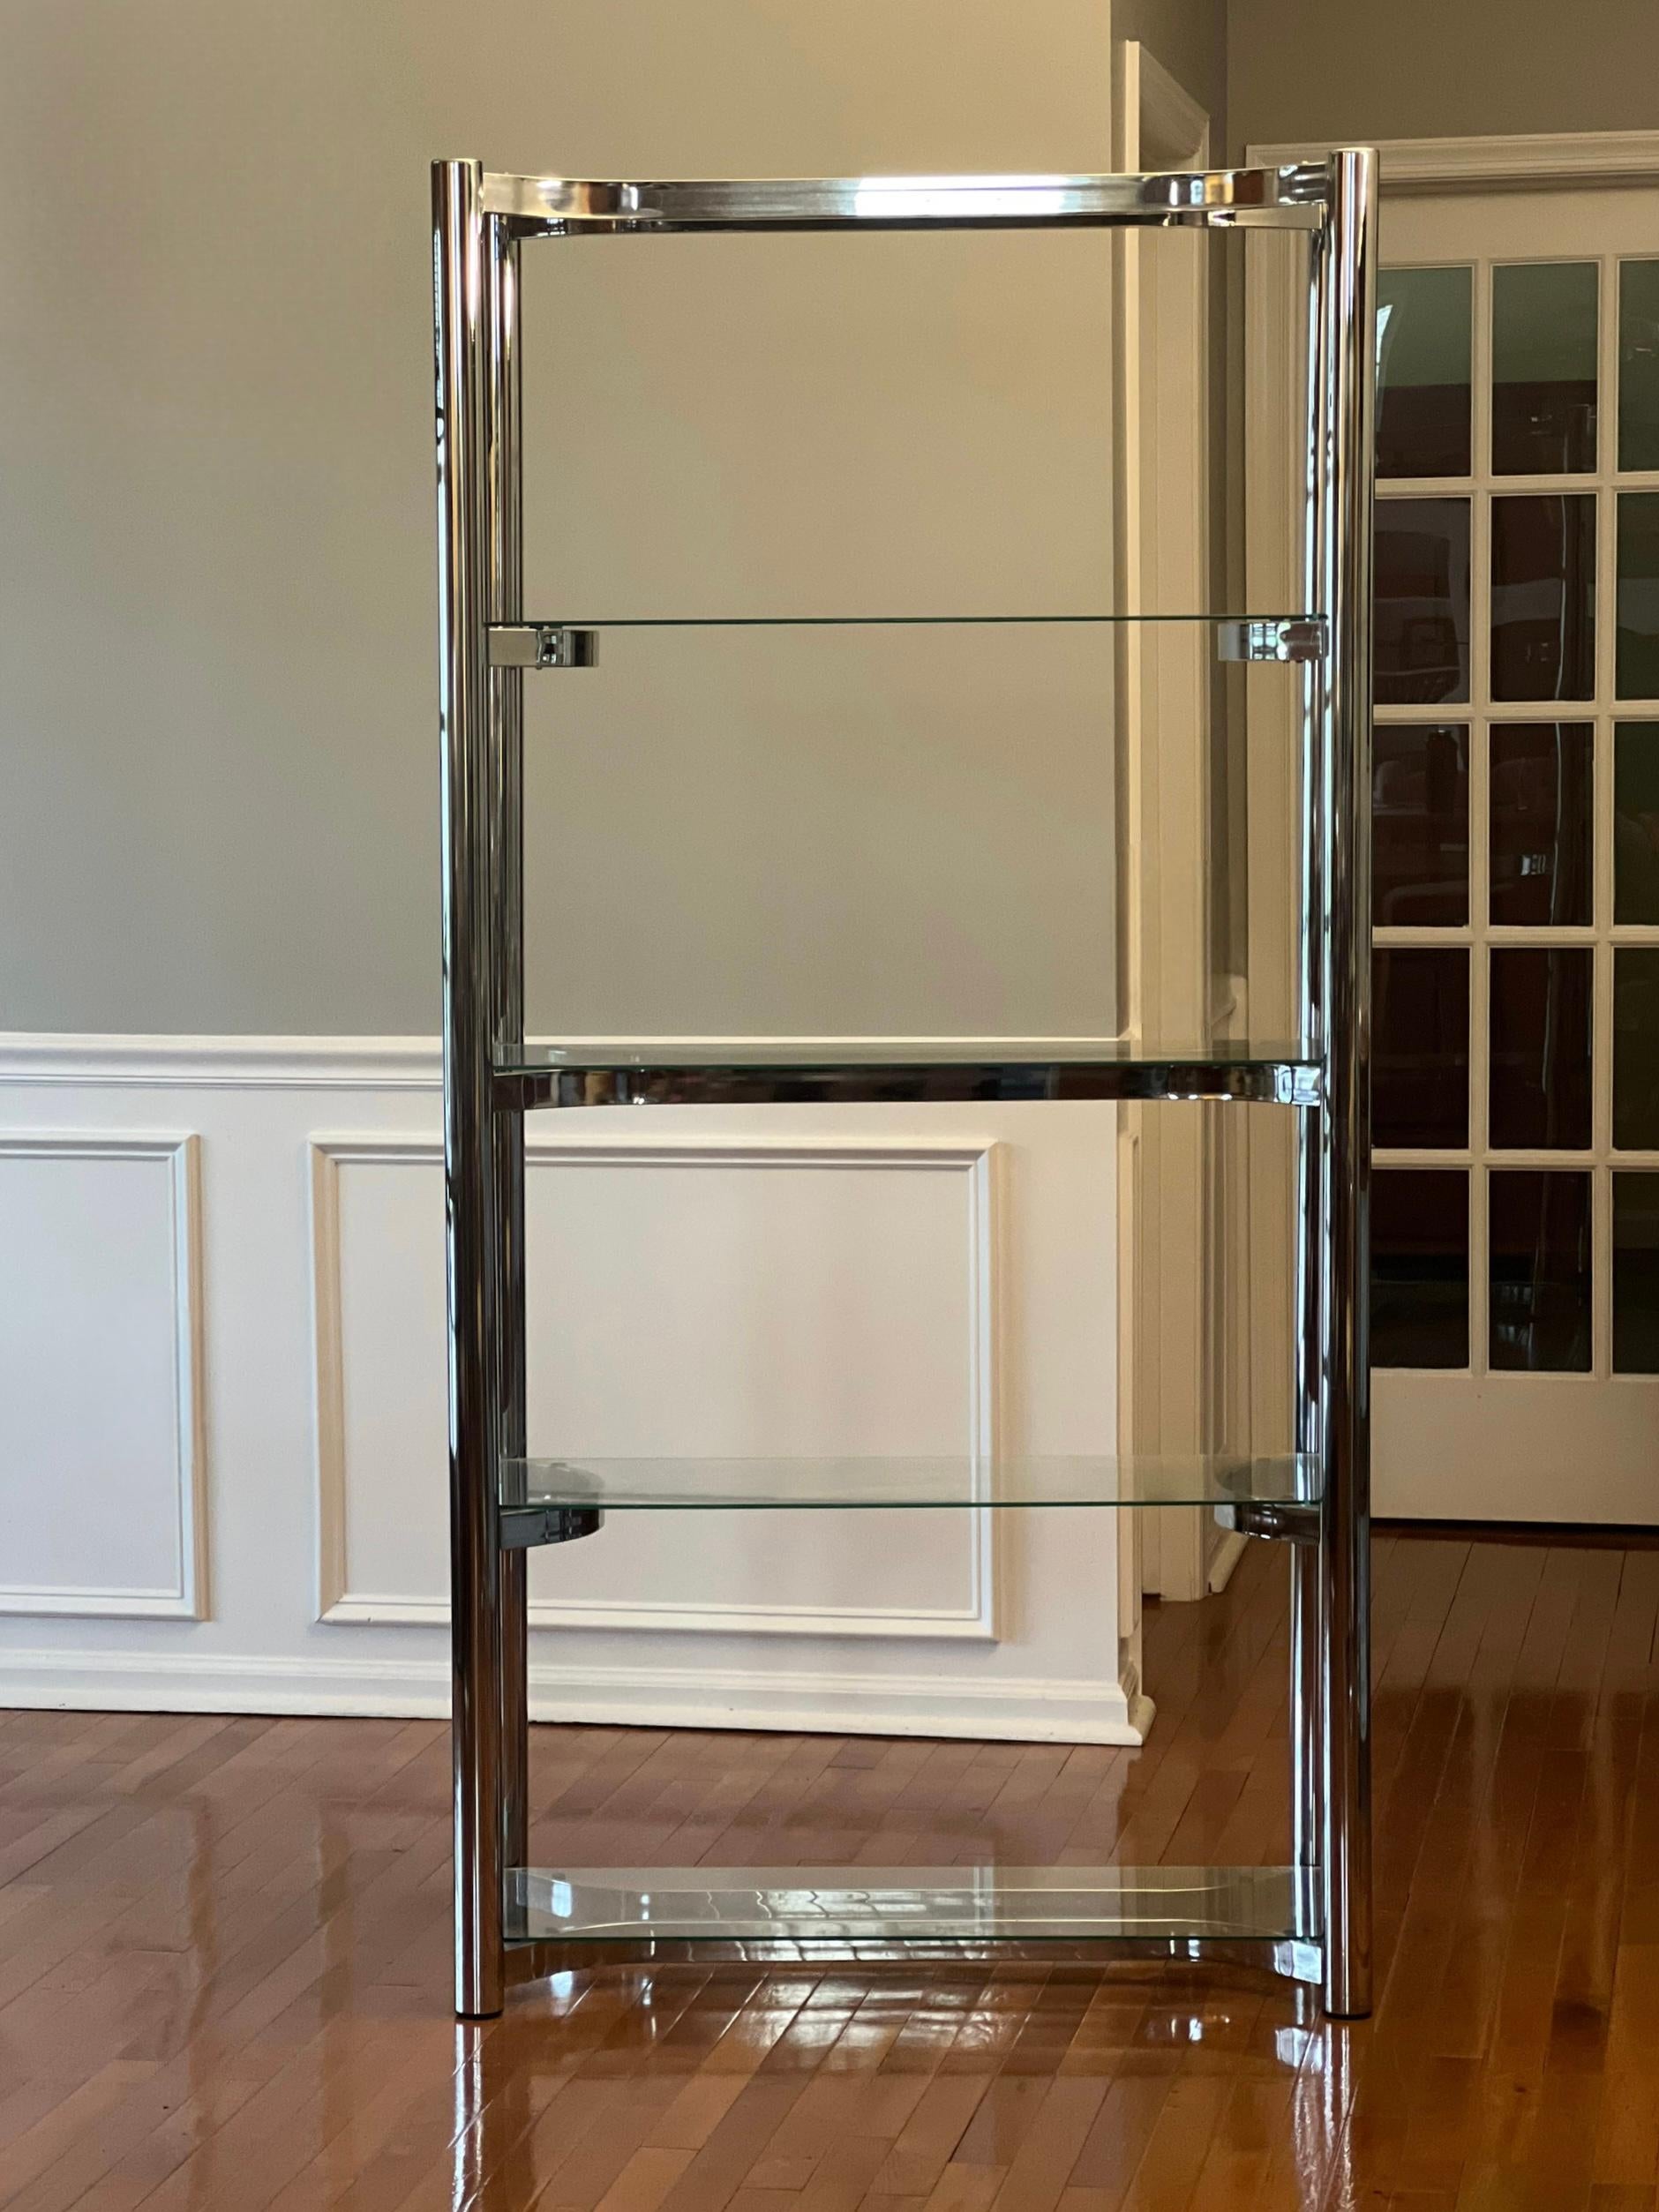 1970s chrome etagere with four glass shelves in the manner of Milo Baughman. 

The flat bar shelf supports are set in an alternating curved pattern giving it a sleek uniqueness and nicely complement the thick tubular chrome verticals. The top is